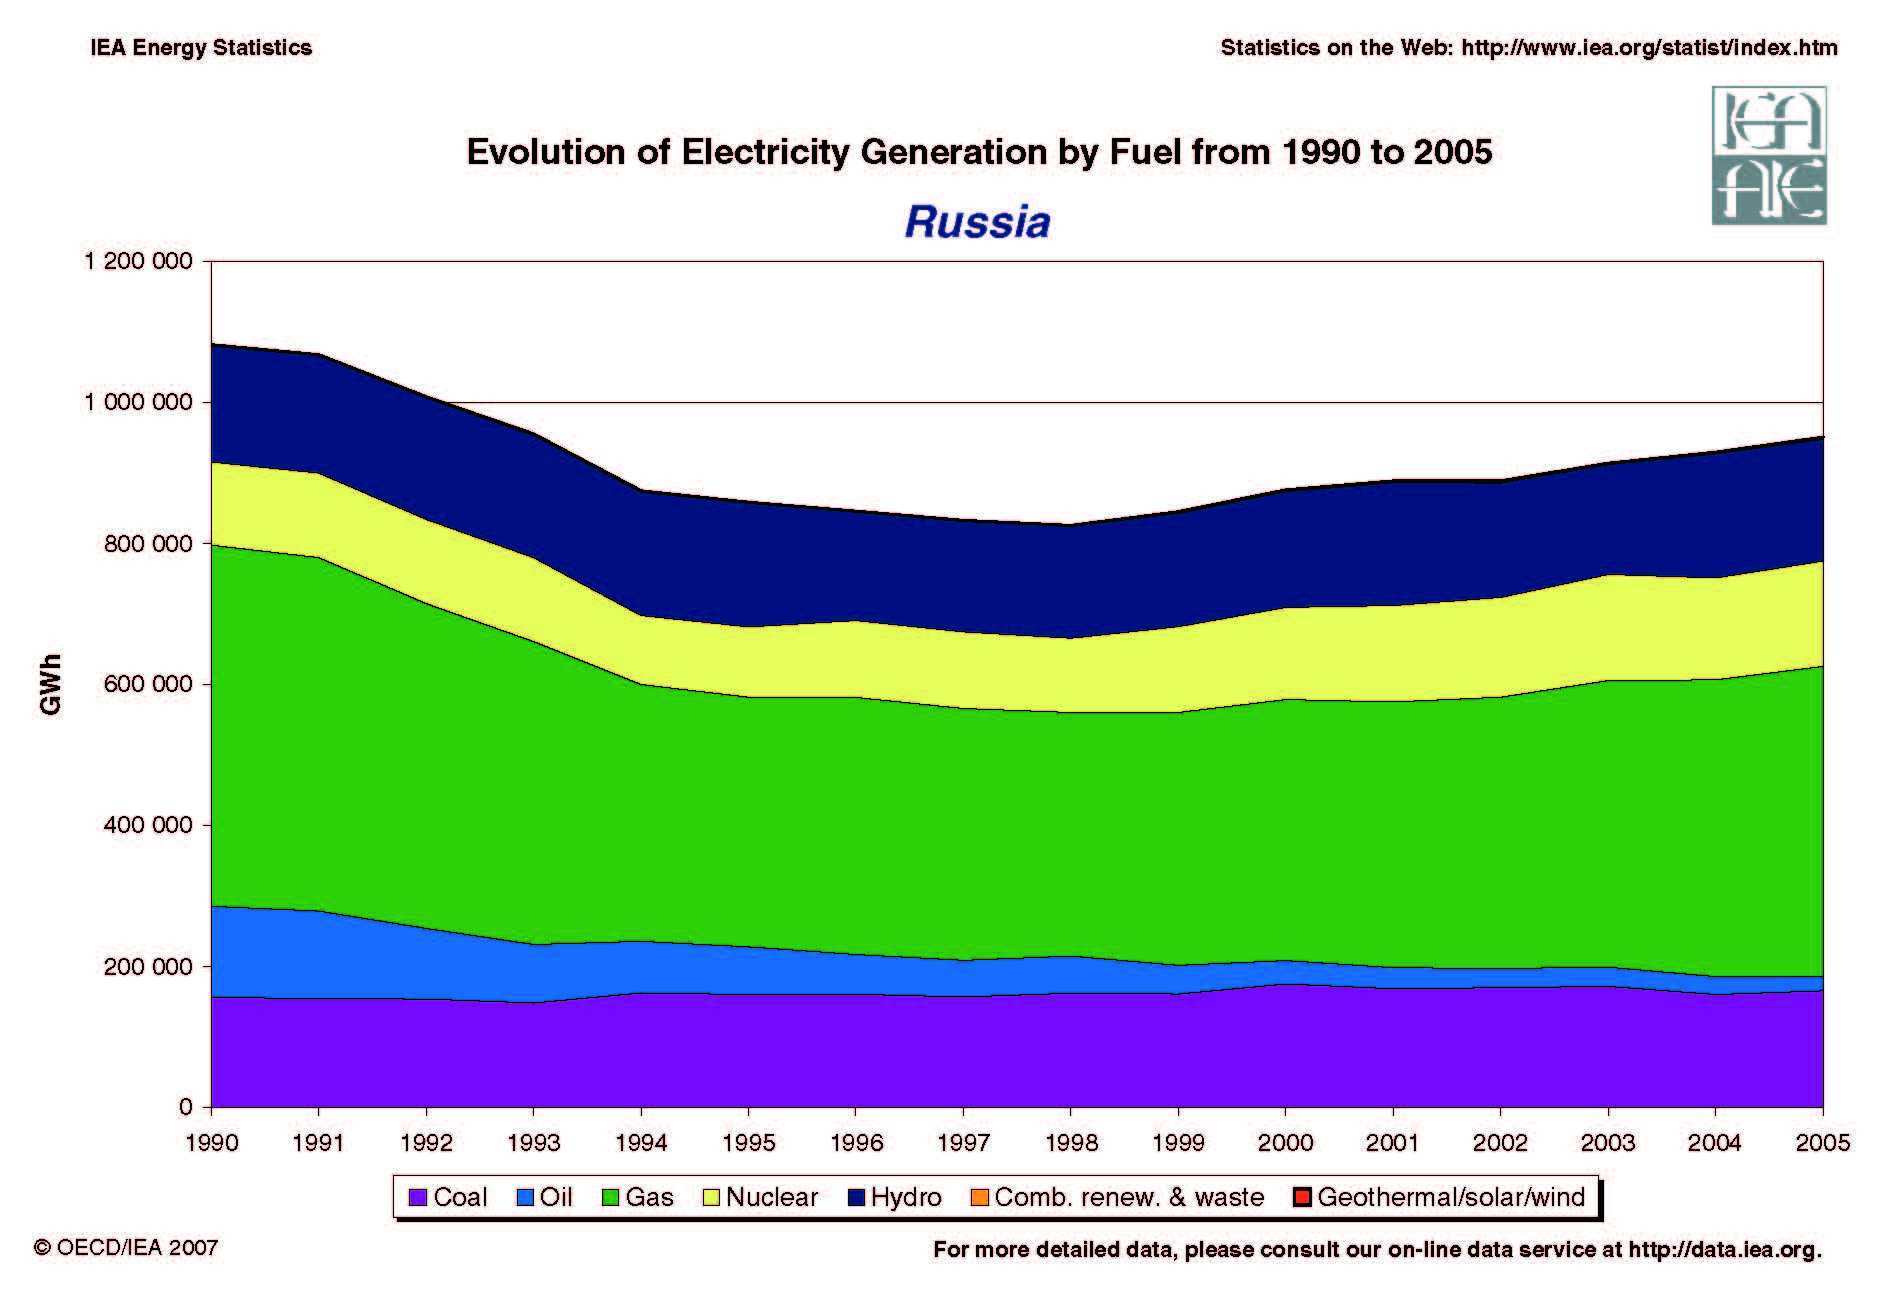 Evolution of Electricity Generation by Fuel, 1990-2005